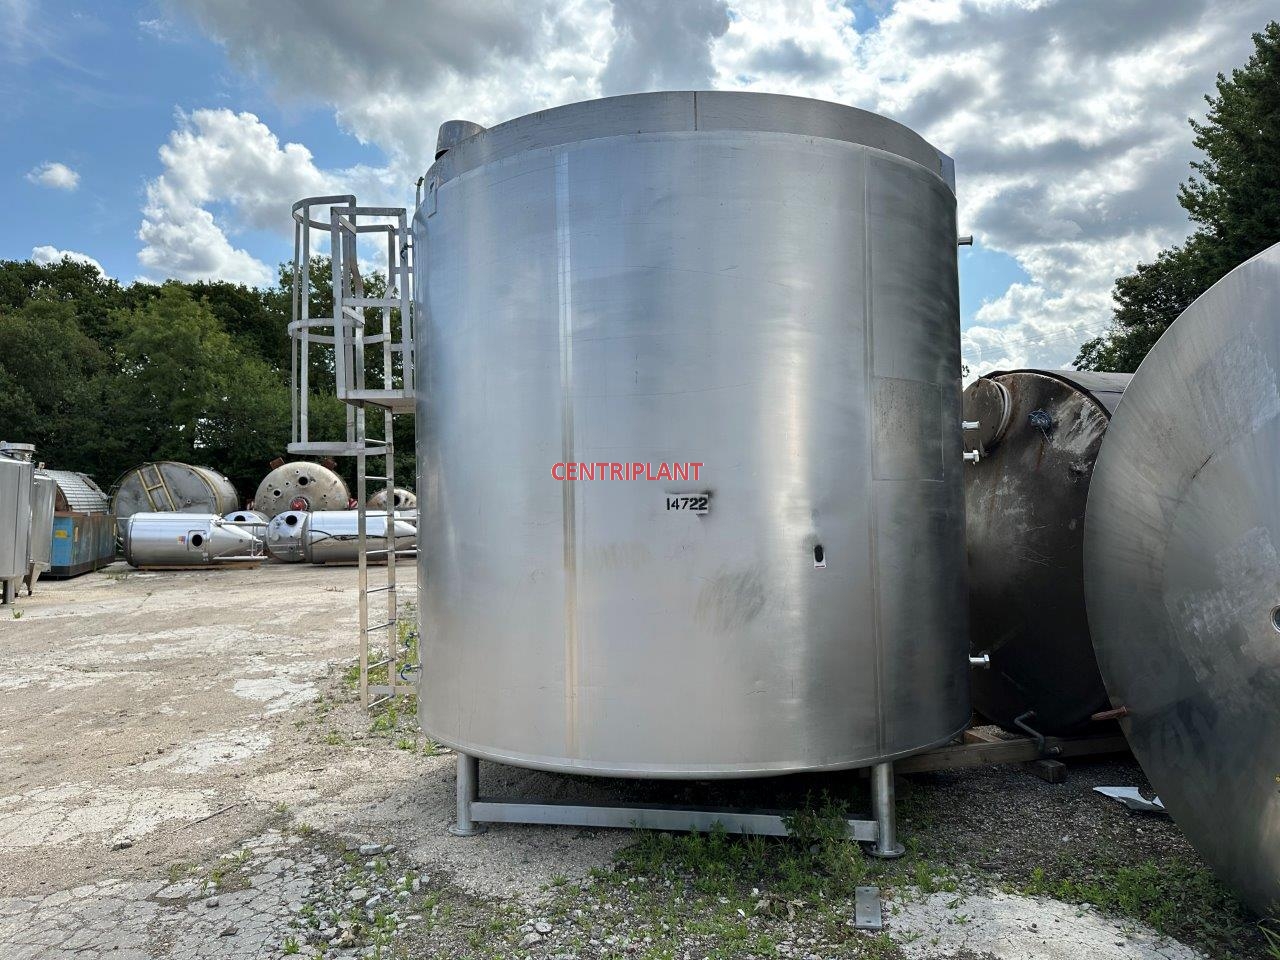 14722 - 20,000 LITRE STAINLESS STEEL 316 GRADE JACKETED AND INSULATED MIXING TANK